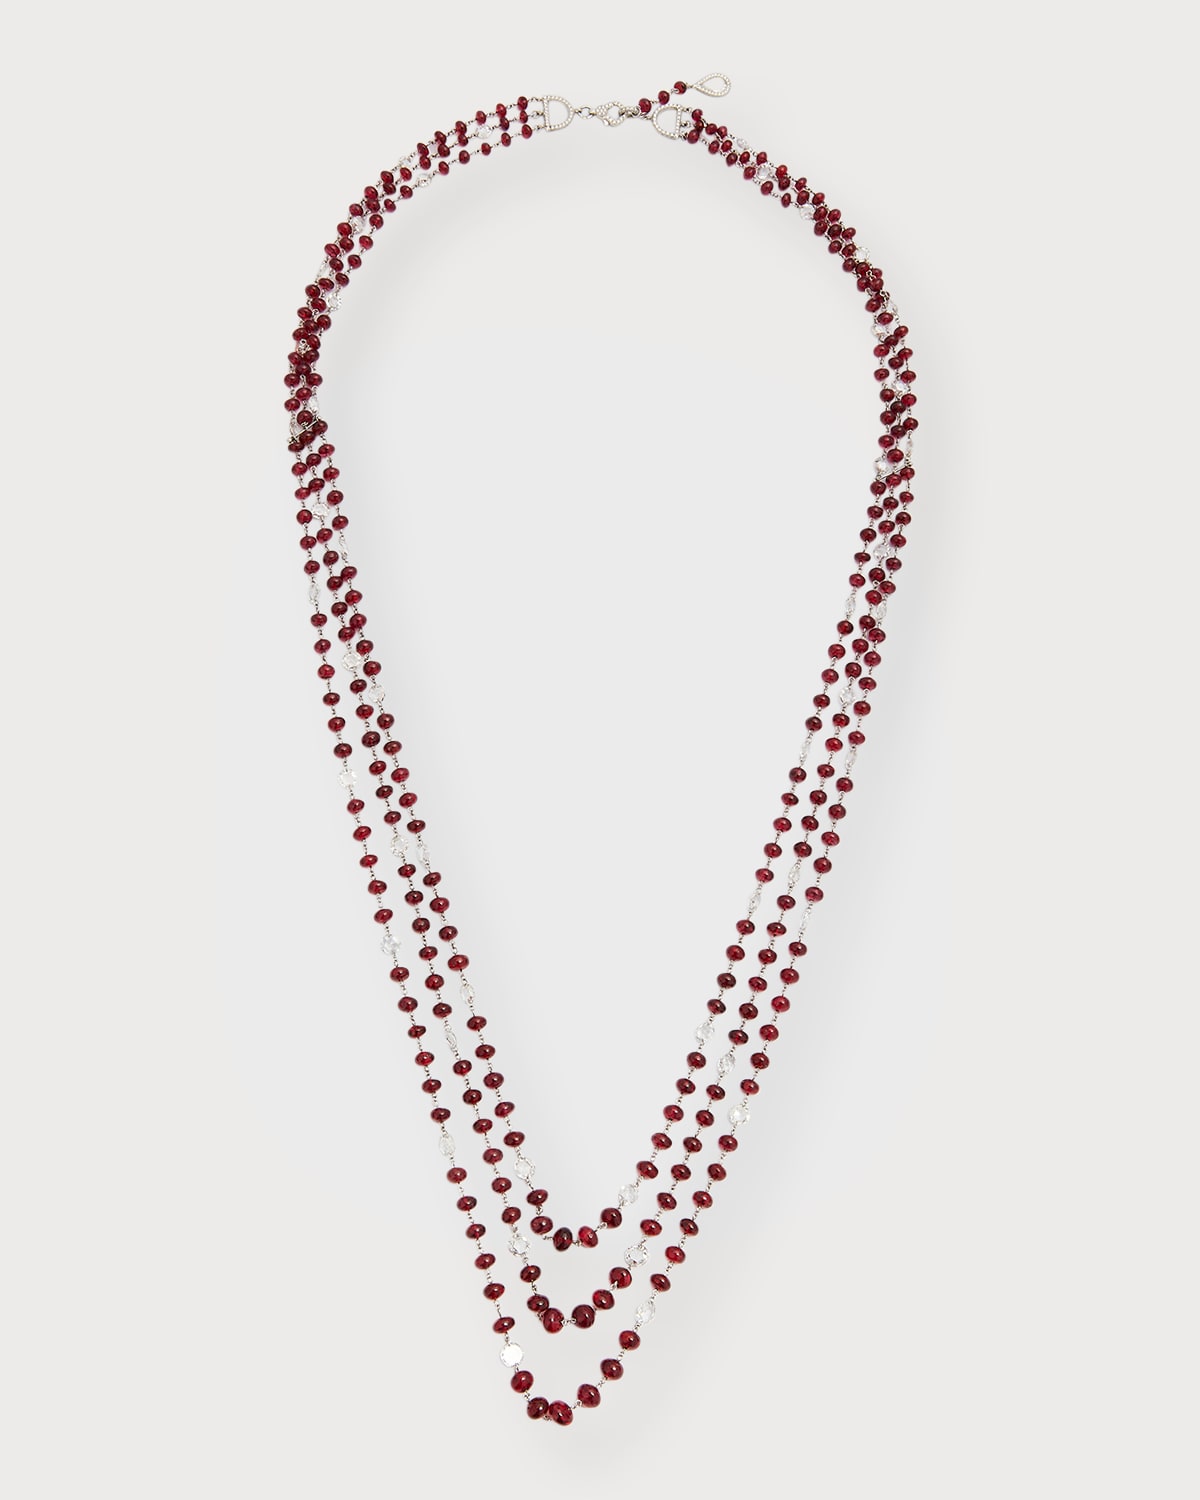 Platinum Necklace with Spinel and Diamonds, 26"L